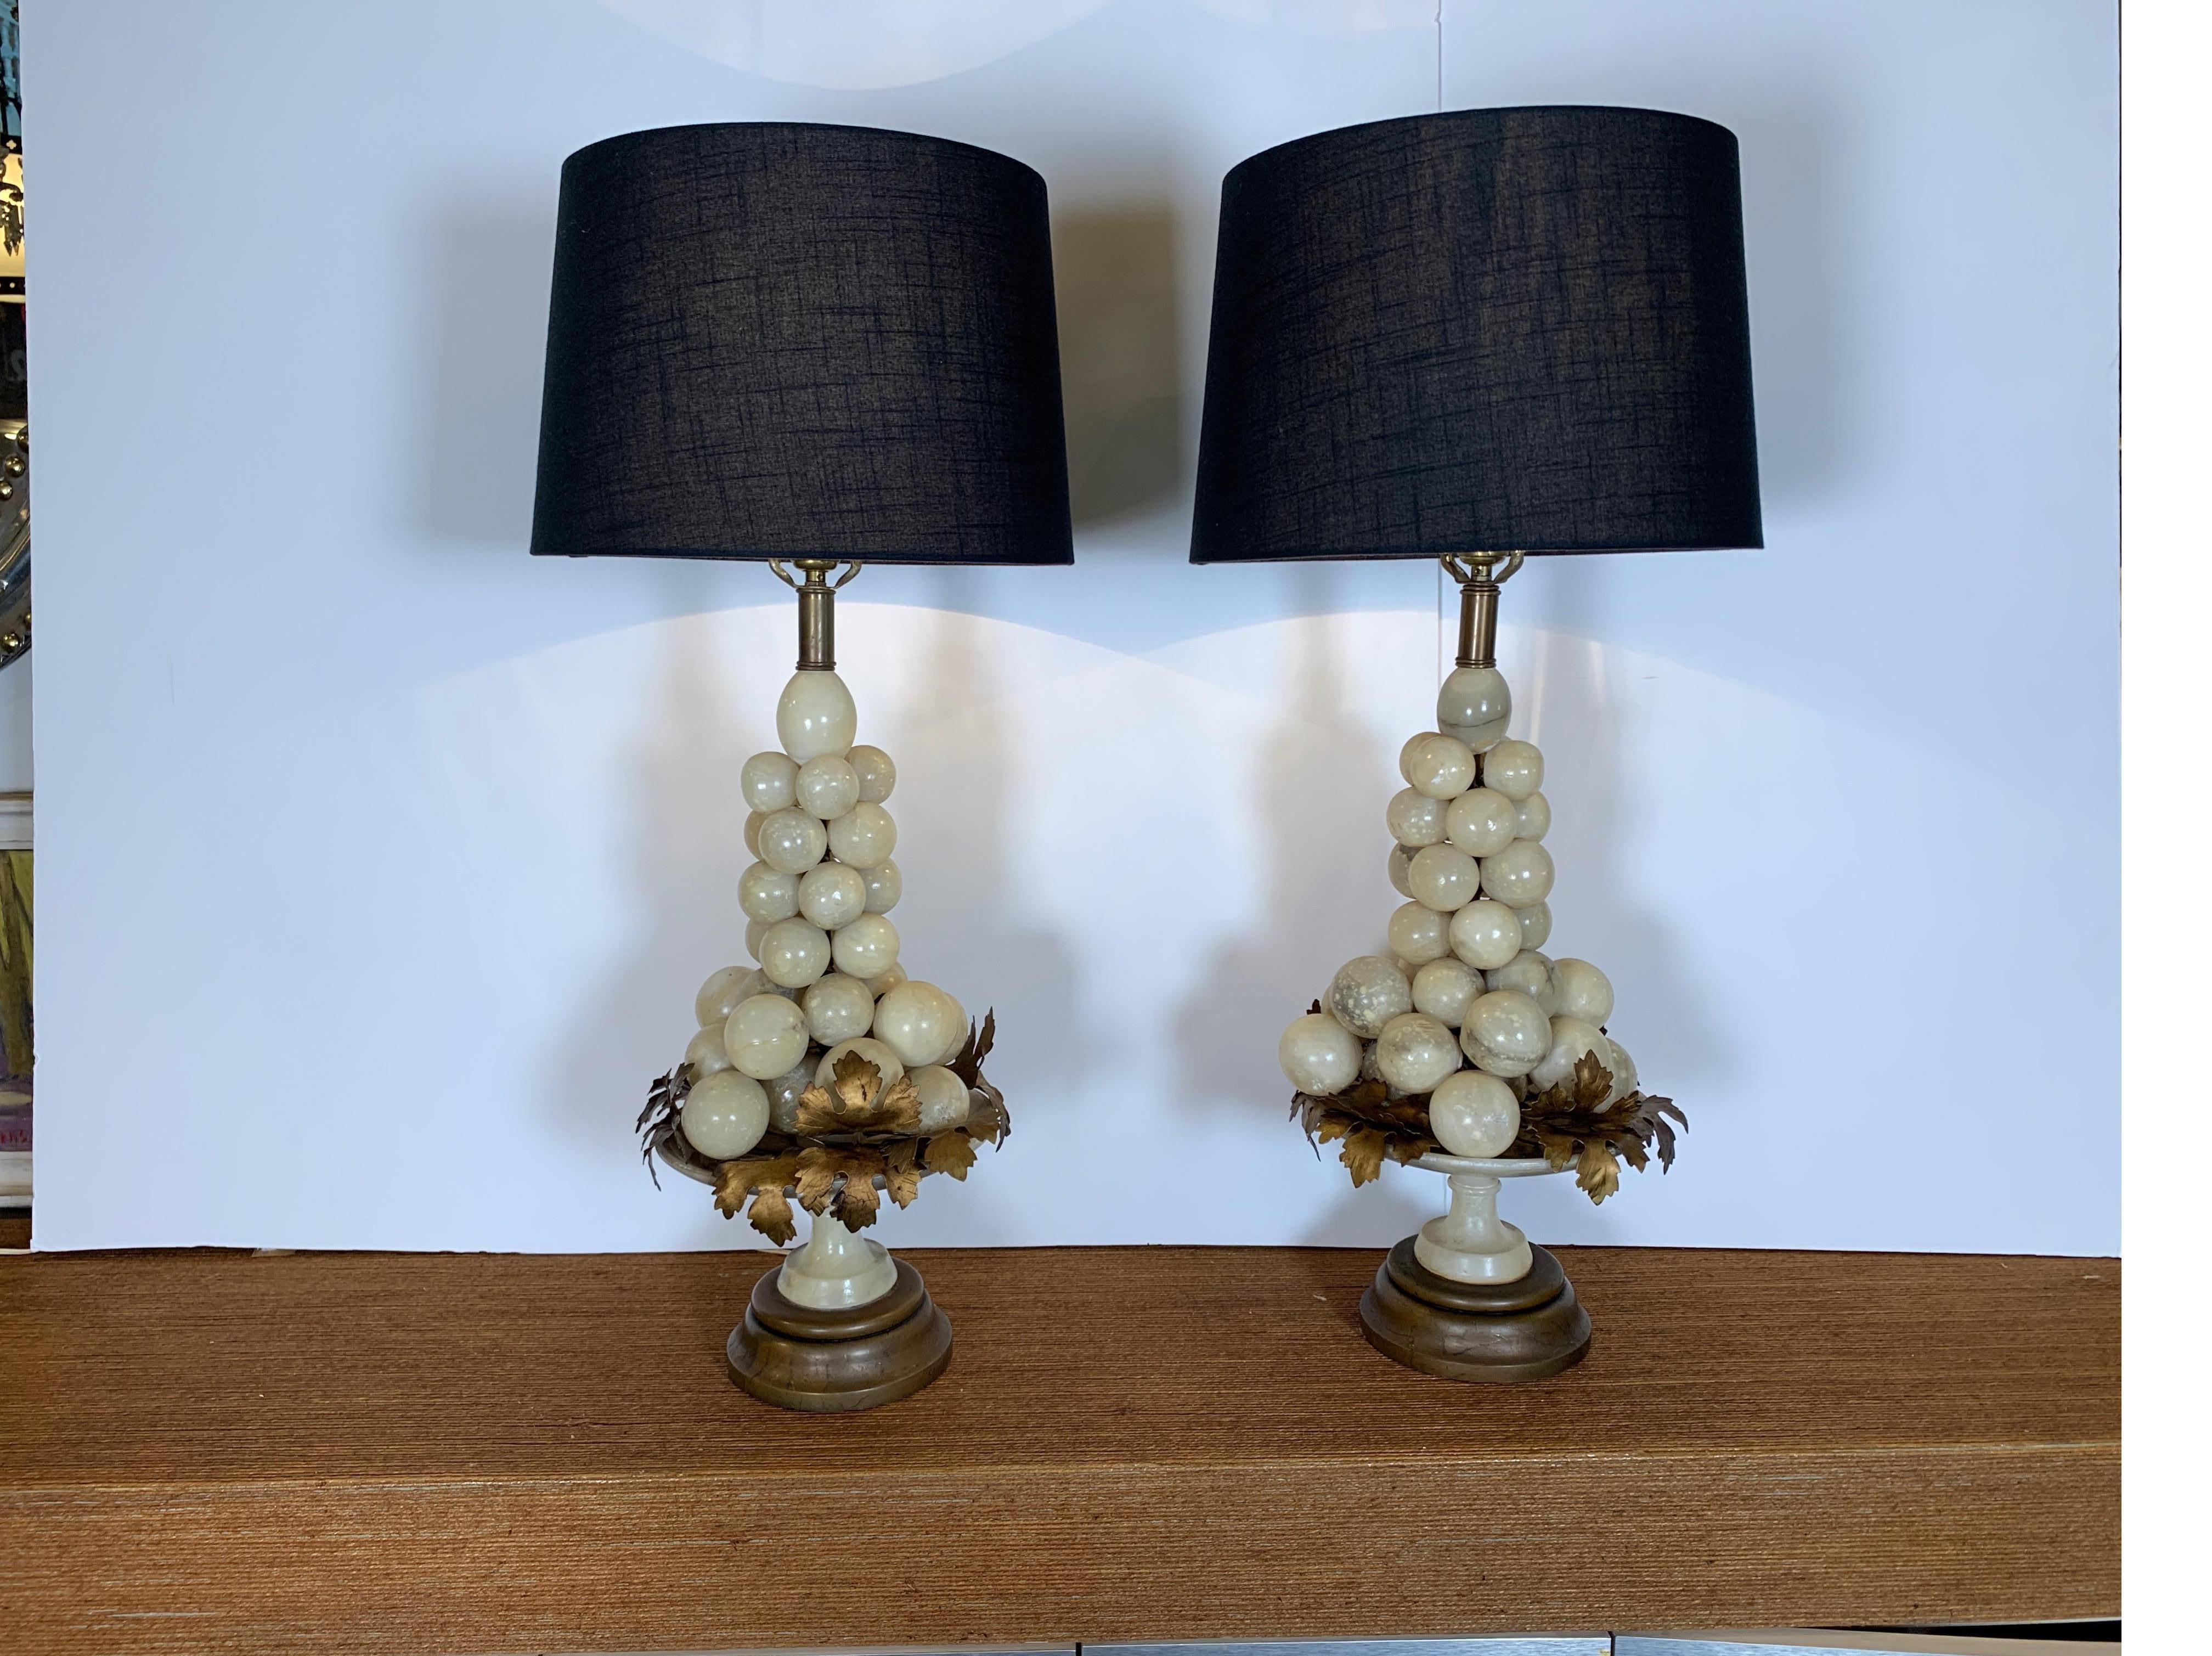 A whimsical and stylish pair of polished alabaster lamps. The lamps are a stacked grouping of stone grapes resting on gilt metal leaves with an alabaster compote style pedestal base on a wood bottom. Mid-20th century 26 inches tall to the top of the